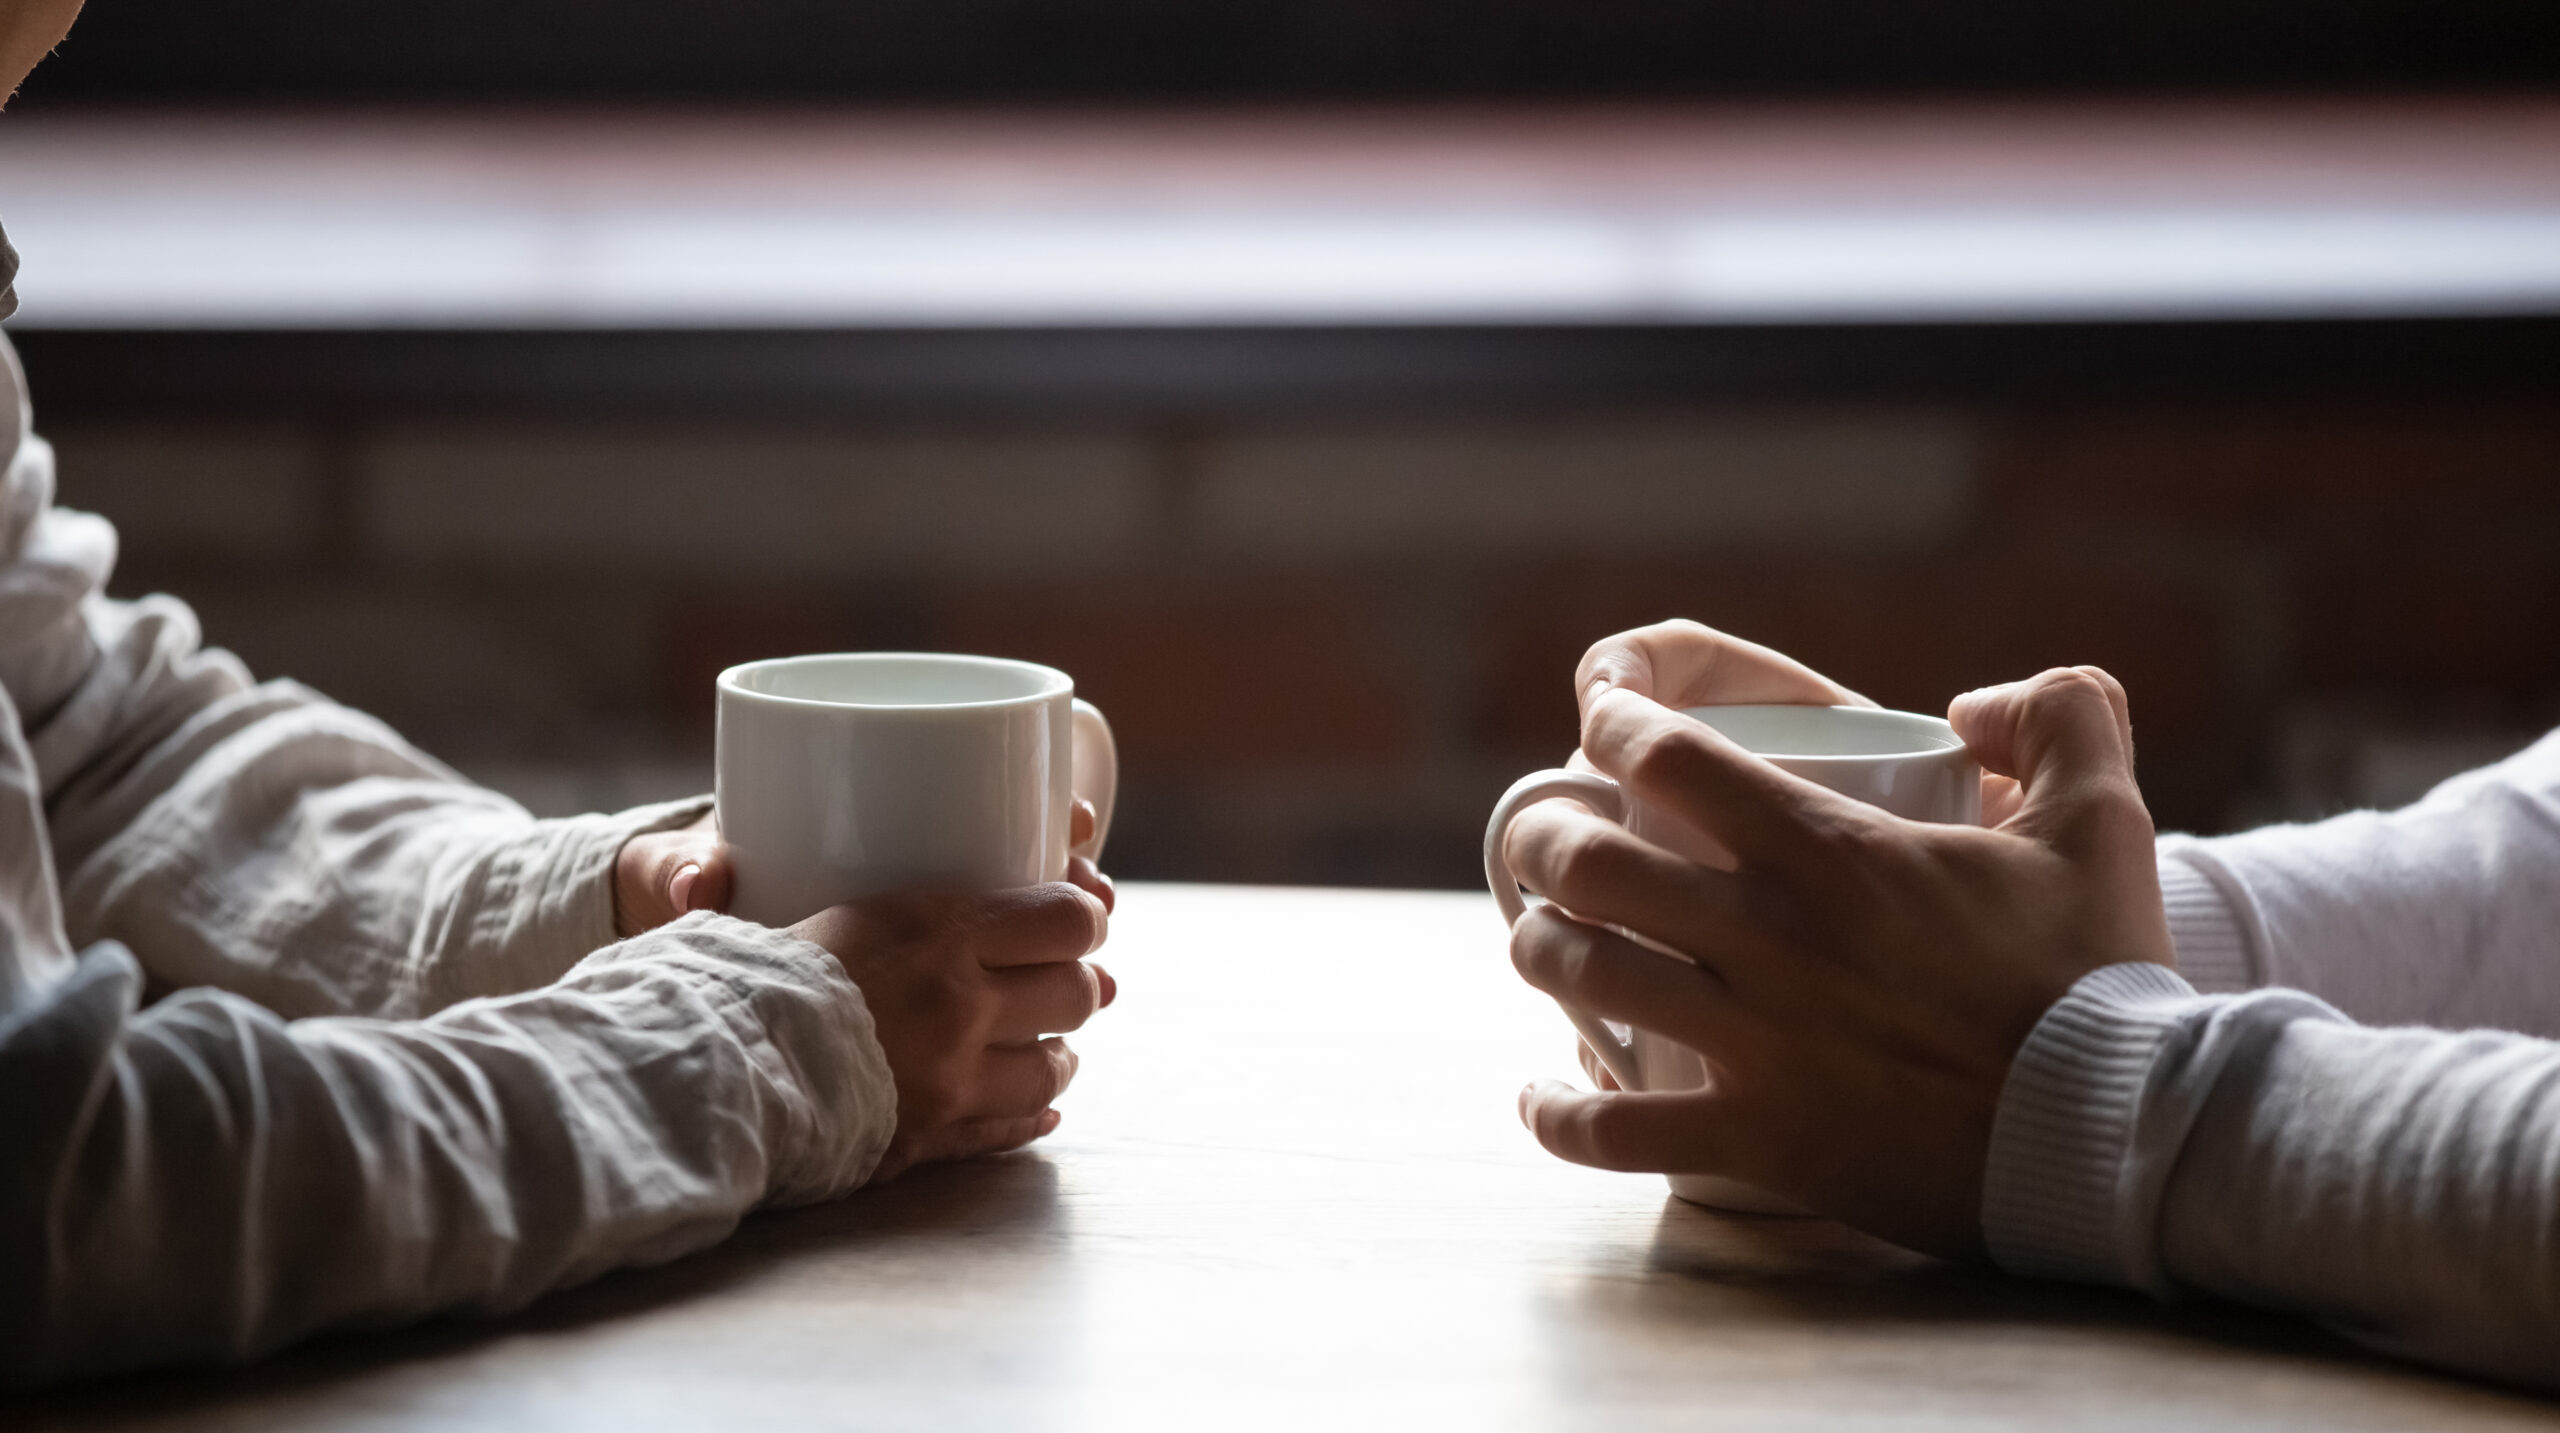 Hands holding coffee